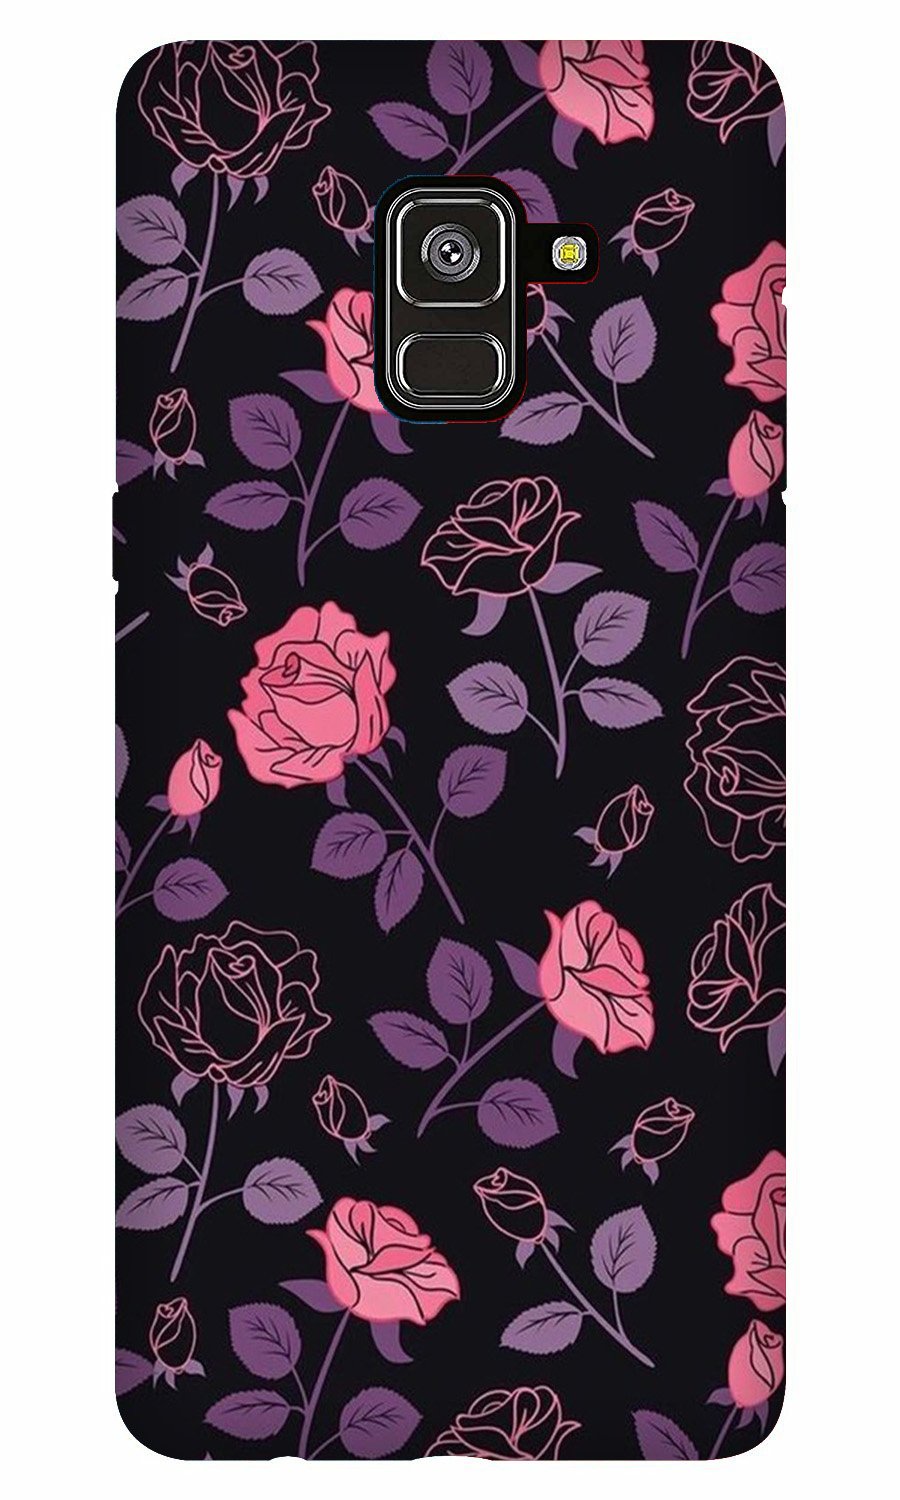 Rose Pattern Case for Galaxy A8 Plus